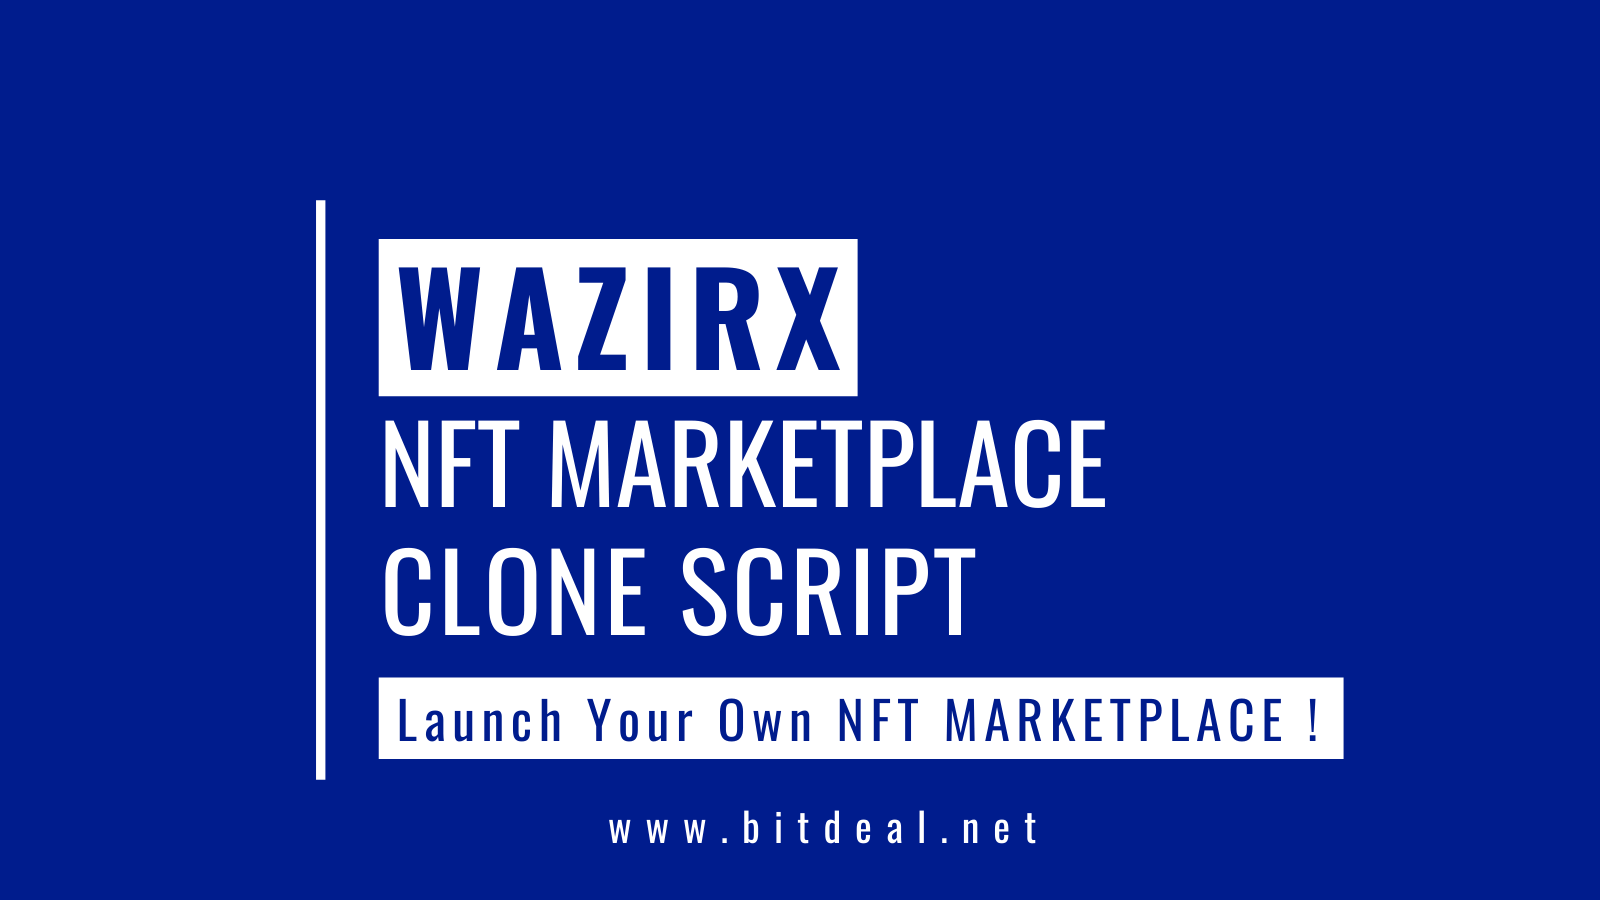 Article about How To Start an NFT Marketplace like Wazirx NFT